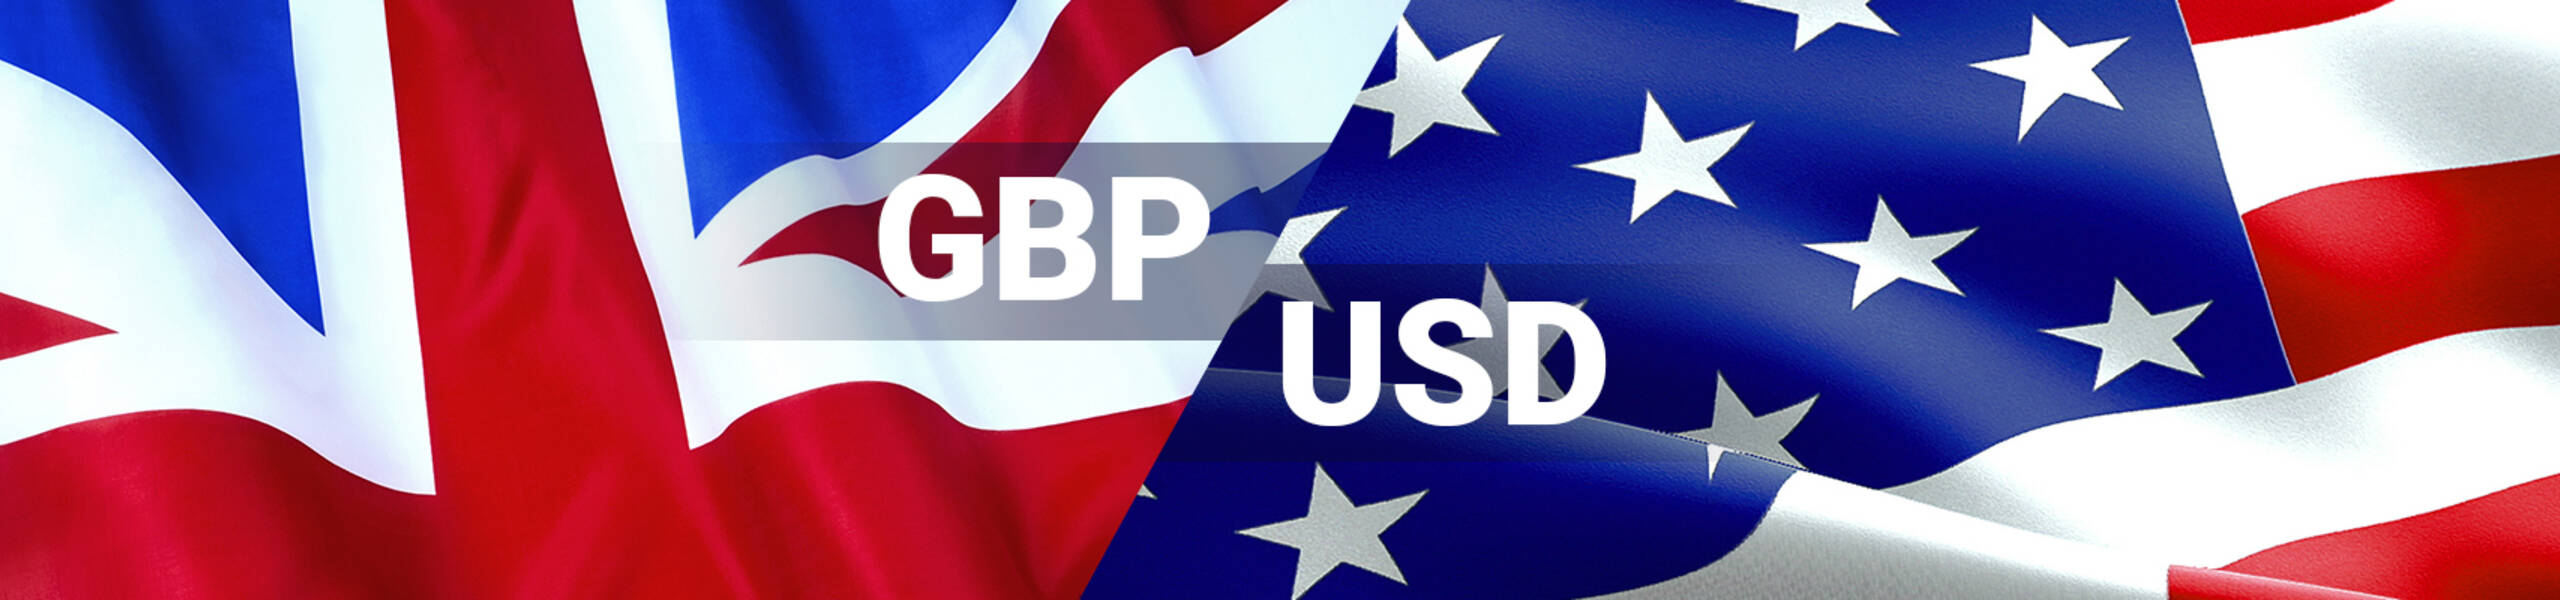 GBP/USD: prices are fixed on Cloud